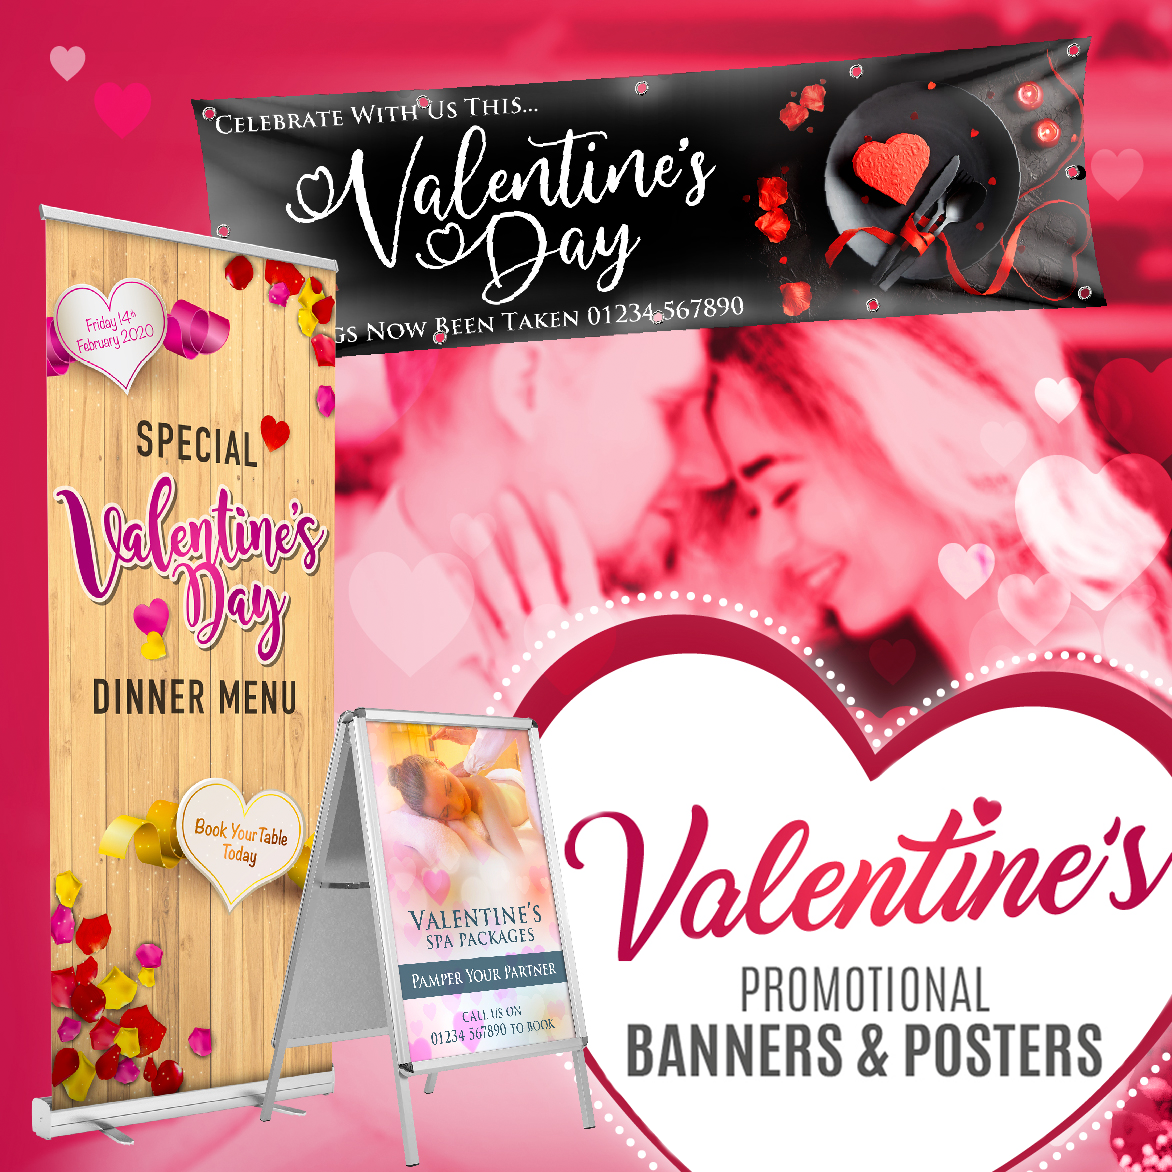 Valentines Day Promotional Material